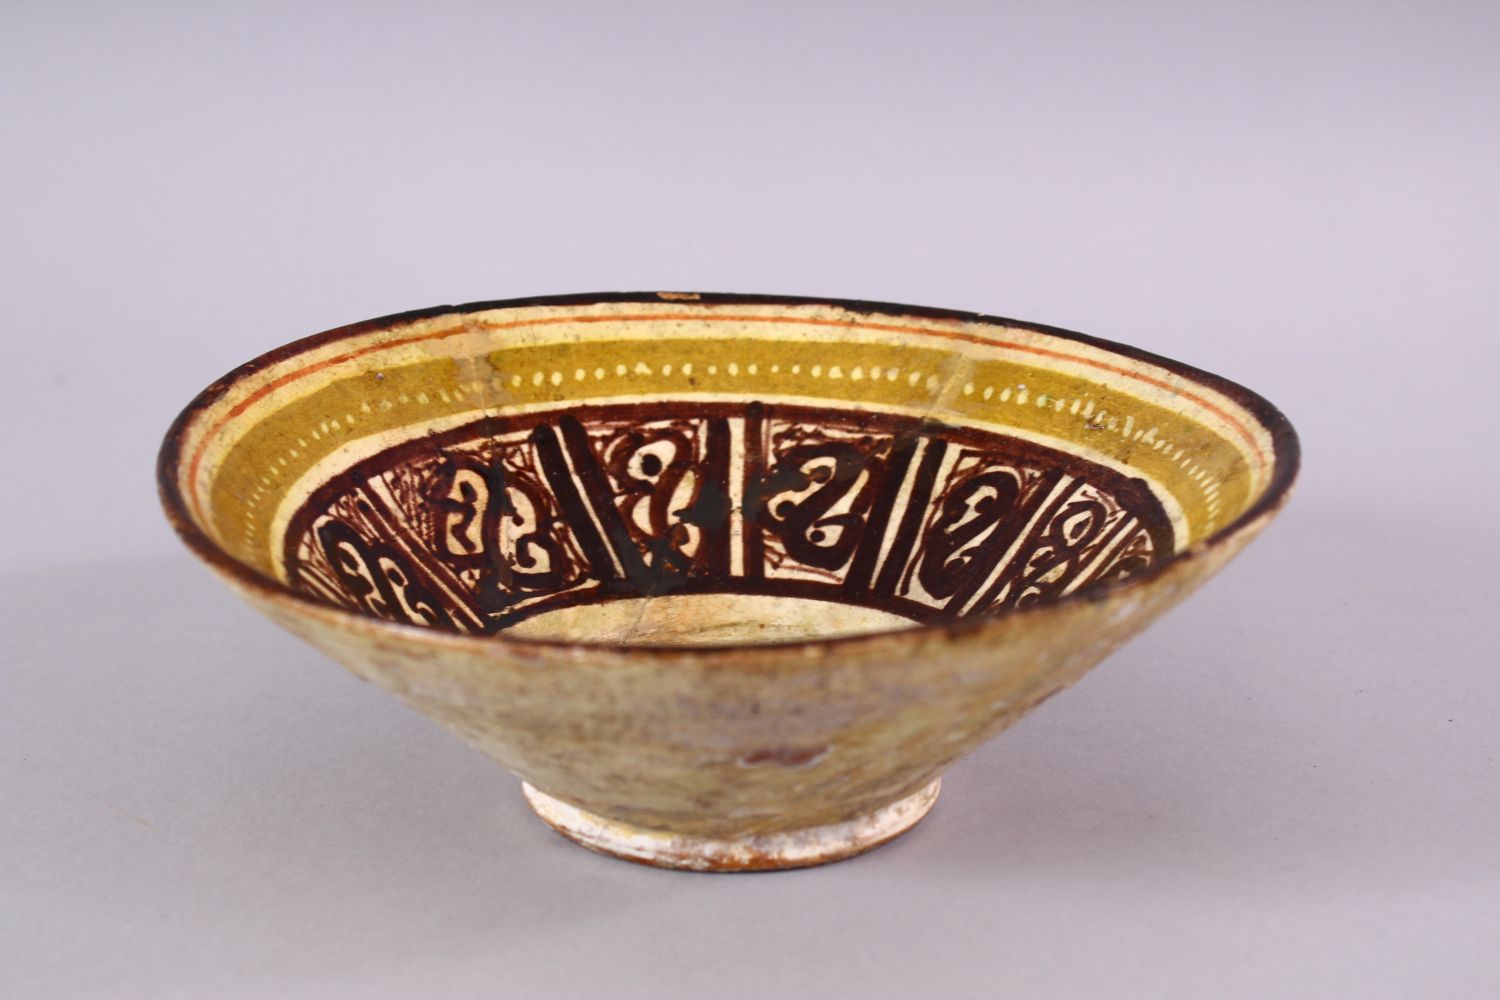 A 12TH CENTURY ISLAMIC / PERSIAN POTTERY BOWL, with brown decorated panels, upon biscuit colour - Image 3 of 6